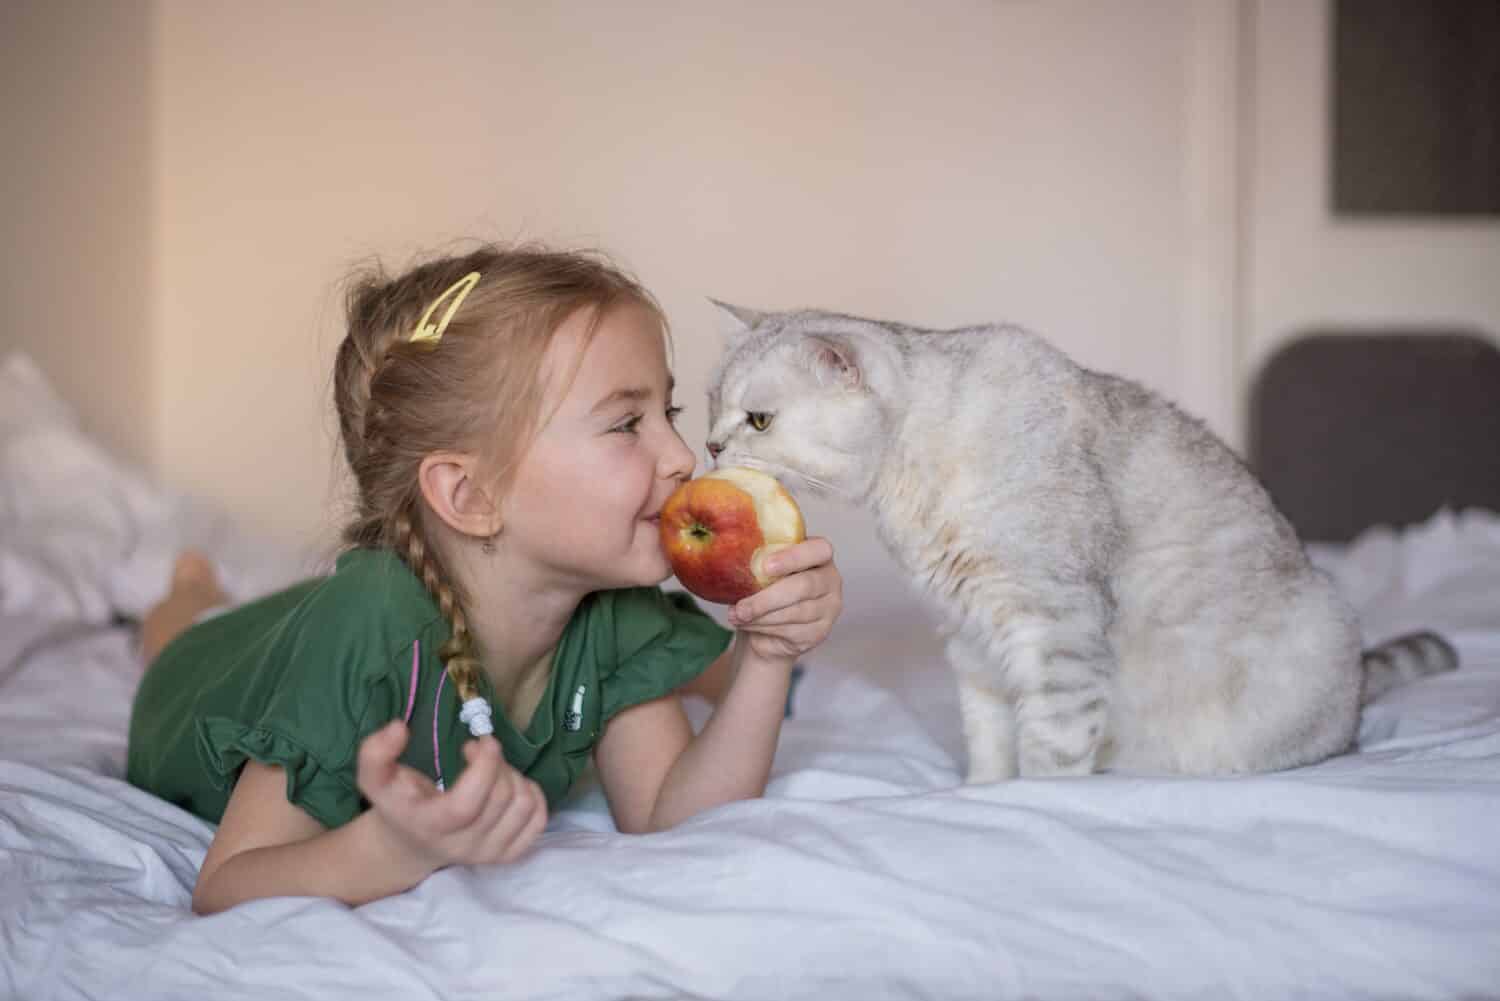 a little girl eats an apple, a pet cat looks and asks for food, the child is not afraid of worms and microbes from the animal, they eat together